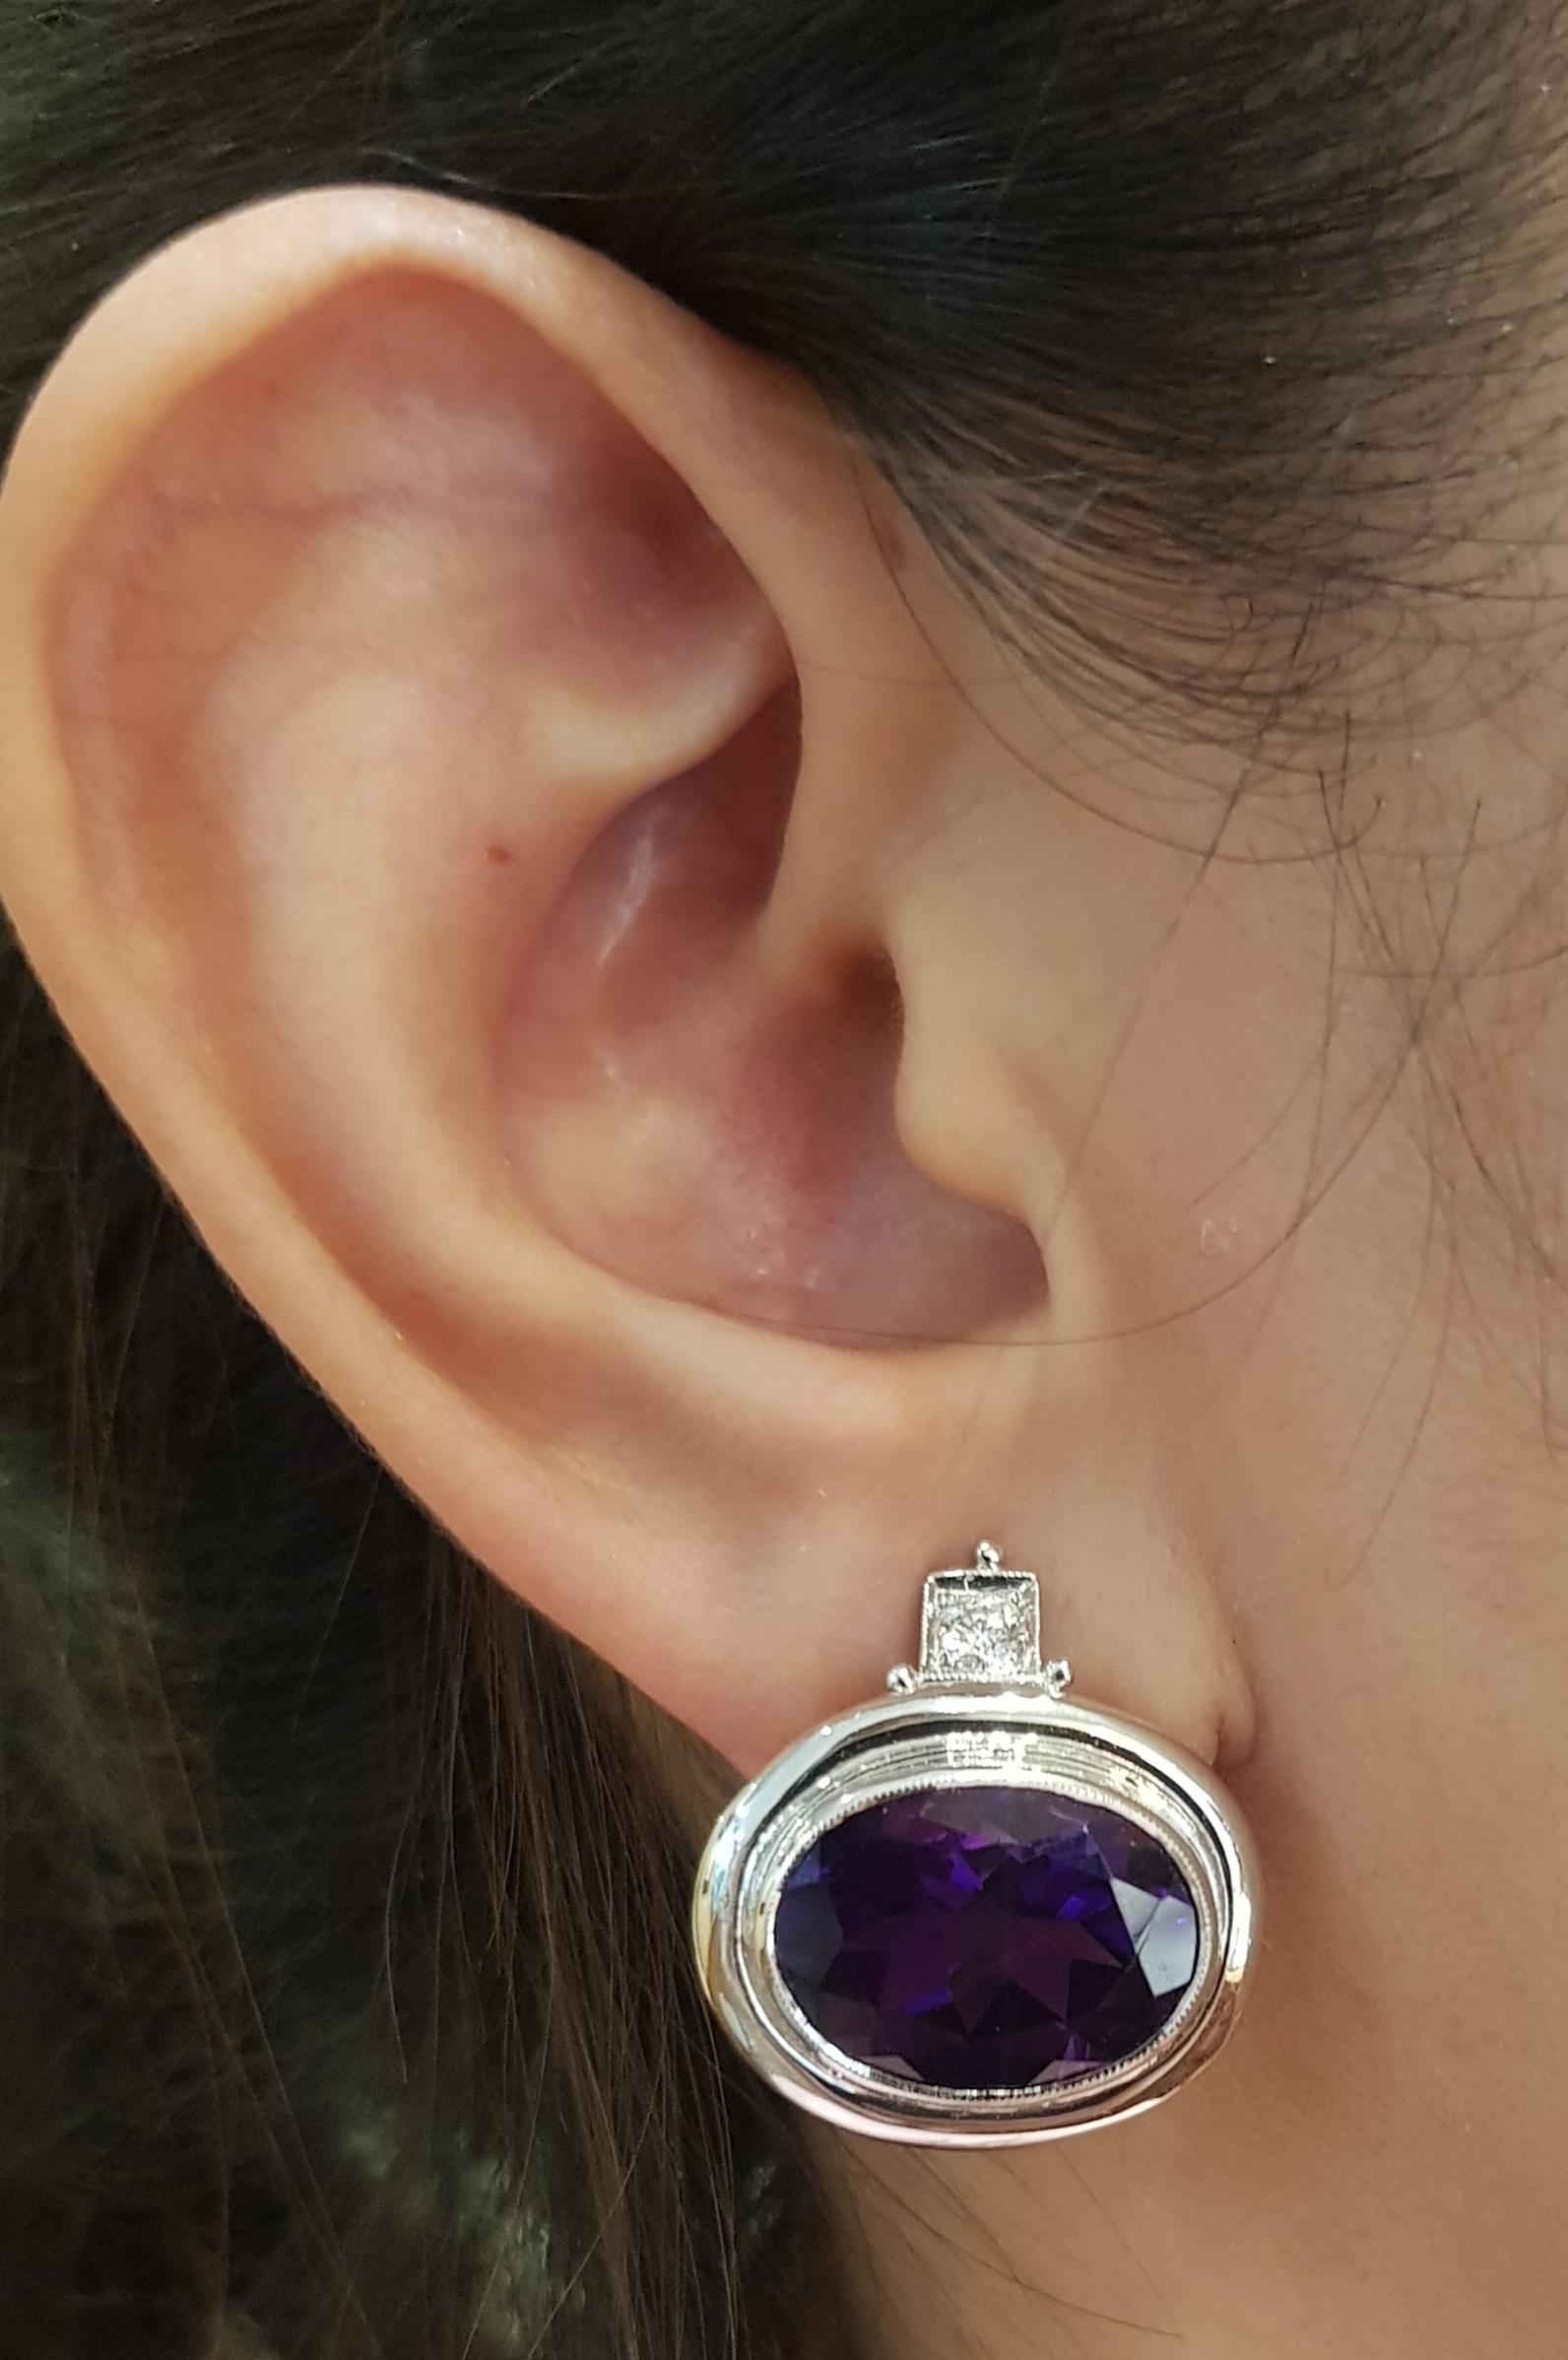 Amethyst 15.09 carats with Diamond 0.26 carat Earrings set in 18 Karat White Gold Settings

Width: 2.0 cm 
Length:  2.2 cm
Total Weight: 14.74 grams

